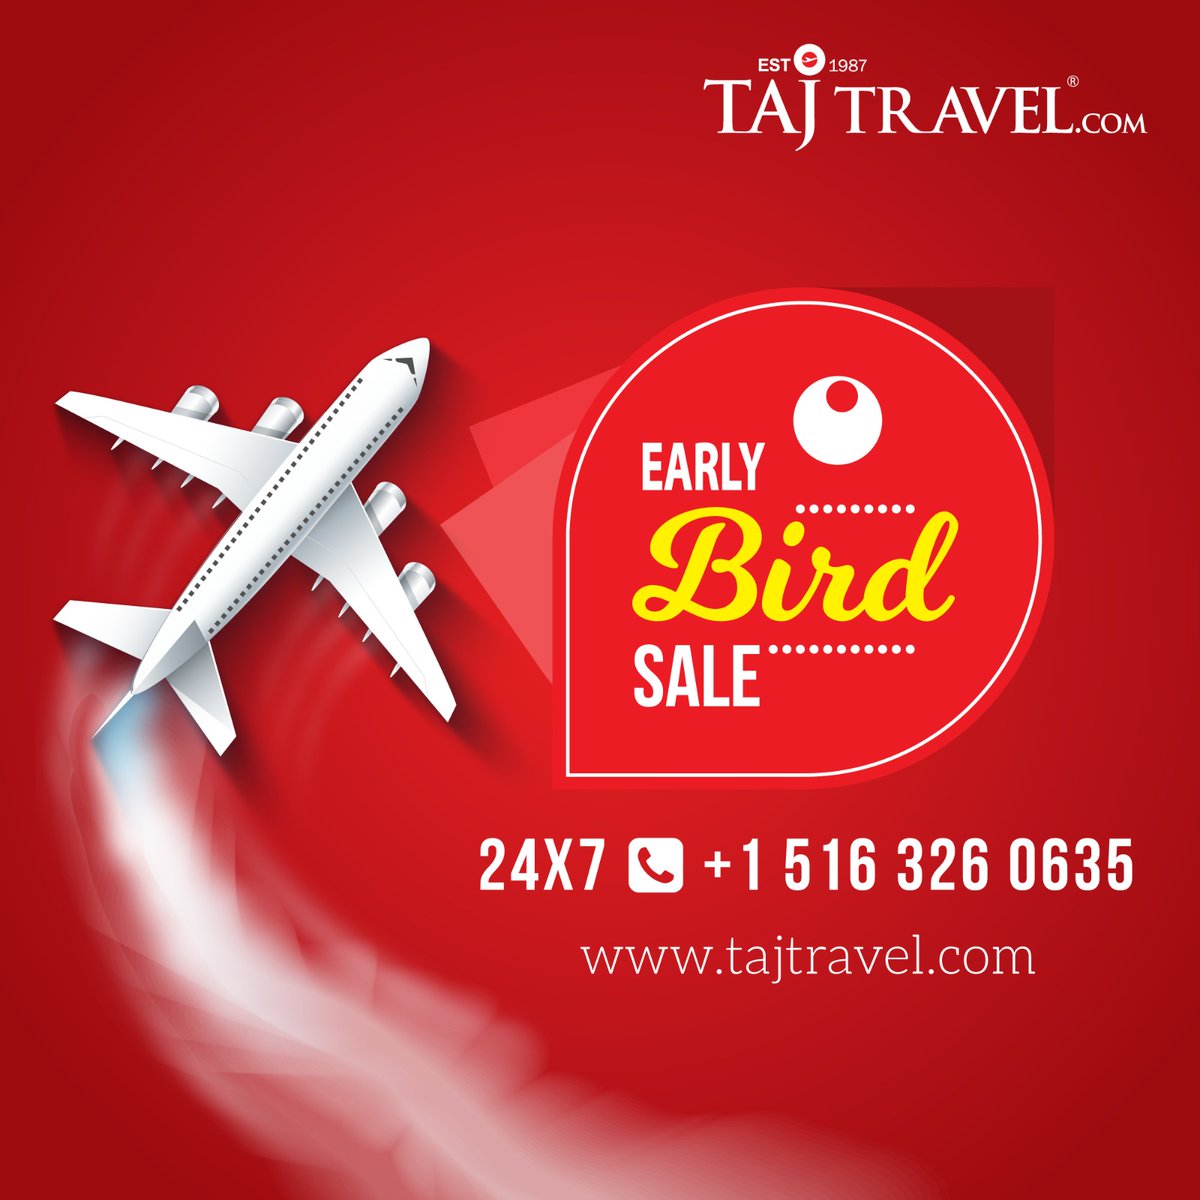 Fly High, Save Big!!

Get Ahead of the Crowd: Early Bird Sale for Extraordinary Journeys!!

For More details:

Call: +1 (516) 326 0635

Email: tours@tajtravel.com

#EarlyBirdOffer #earlybirdspecial #EarlyBirdTickets #earlybird #EarlyBirdSale #earlybirdsales #flightdeals